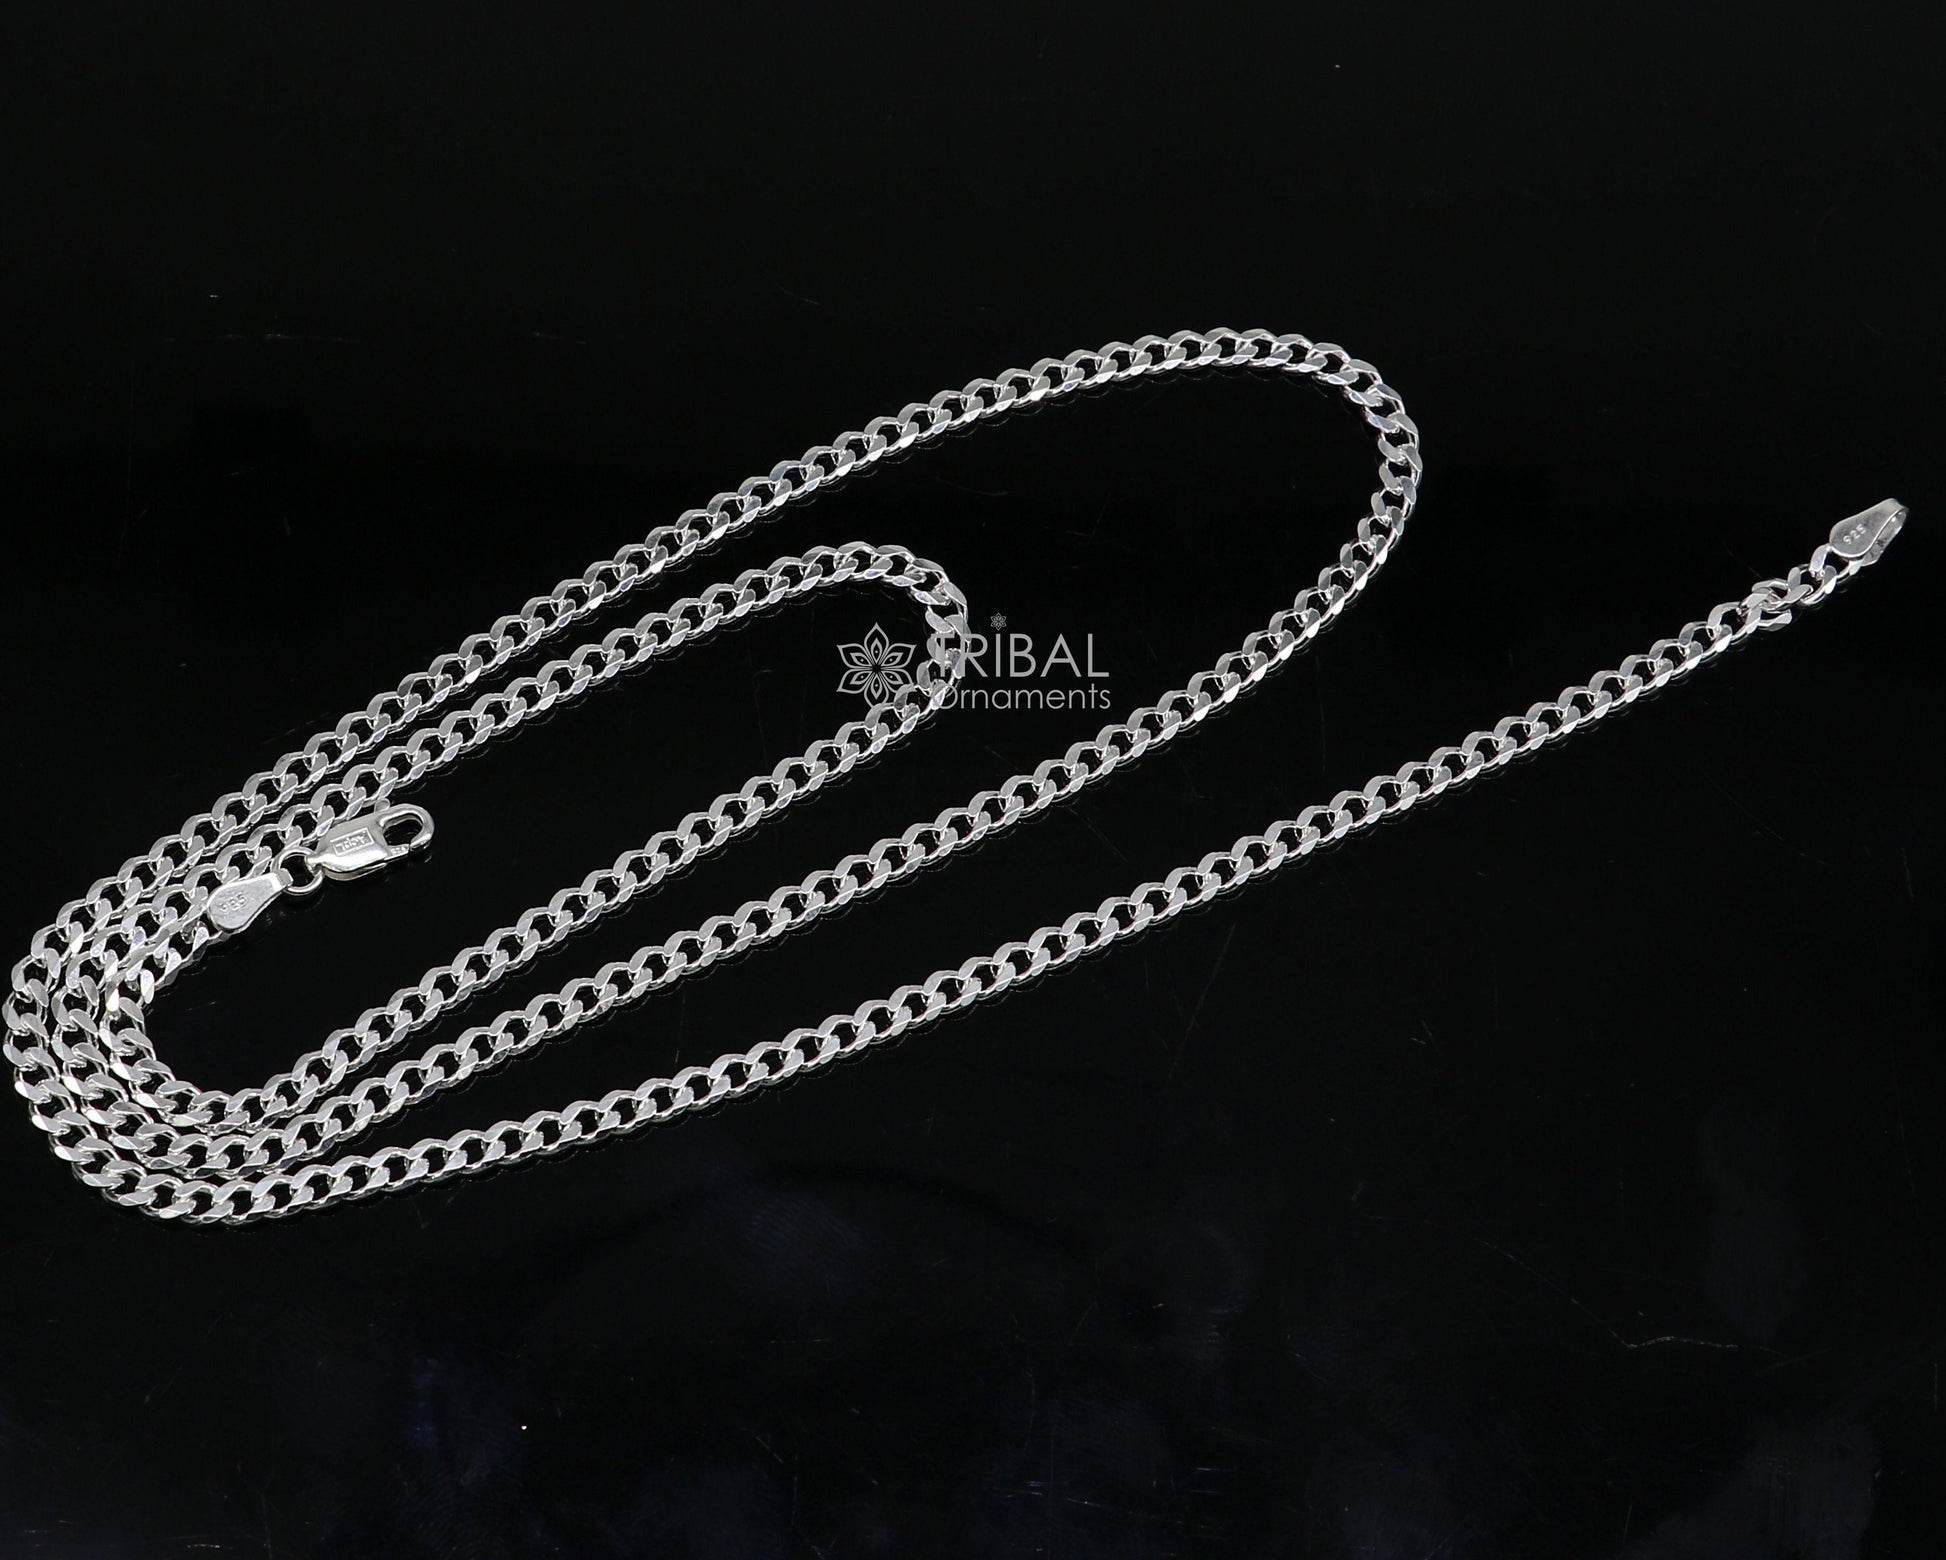 3mm 20"/24" solid 925 sterling silver handmade modern trendy design unique chain necklace giving it a distinctive and stylish look ch232 - TRIBAL ORNAMENTS